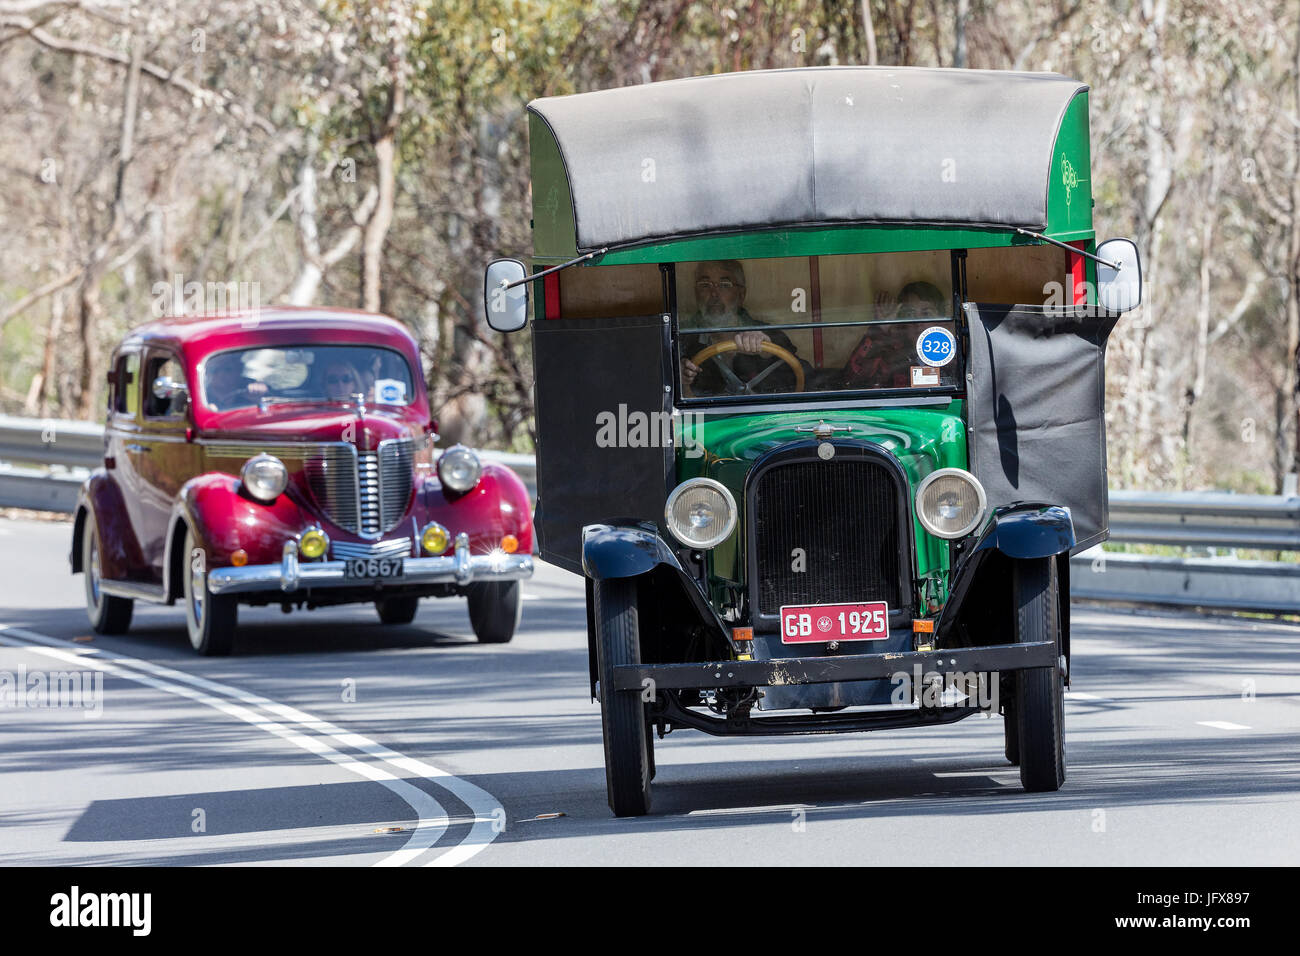 Vintage 1925 Reo SpeedWagon Truck driving on country roads near the town of Birdwood, South Australia. Stock Photo